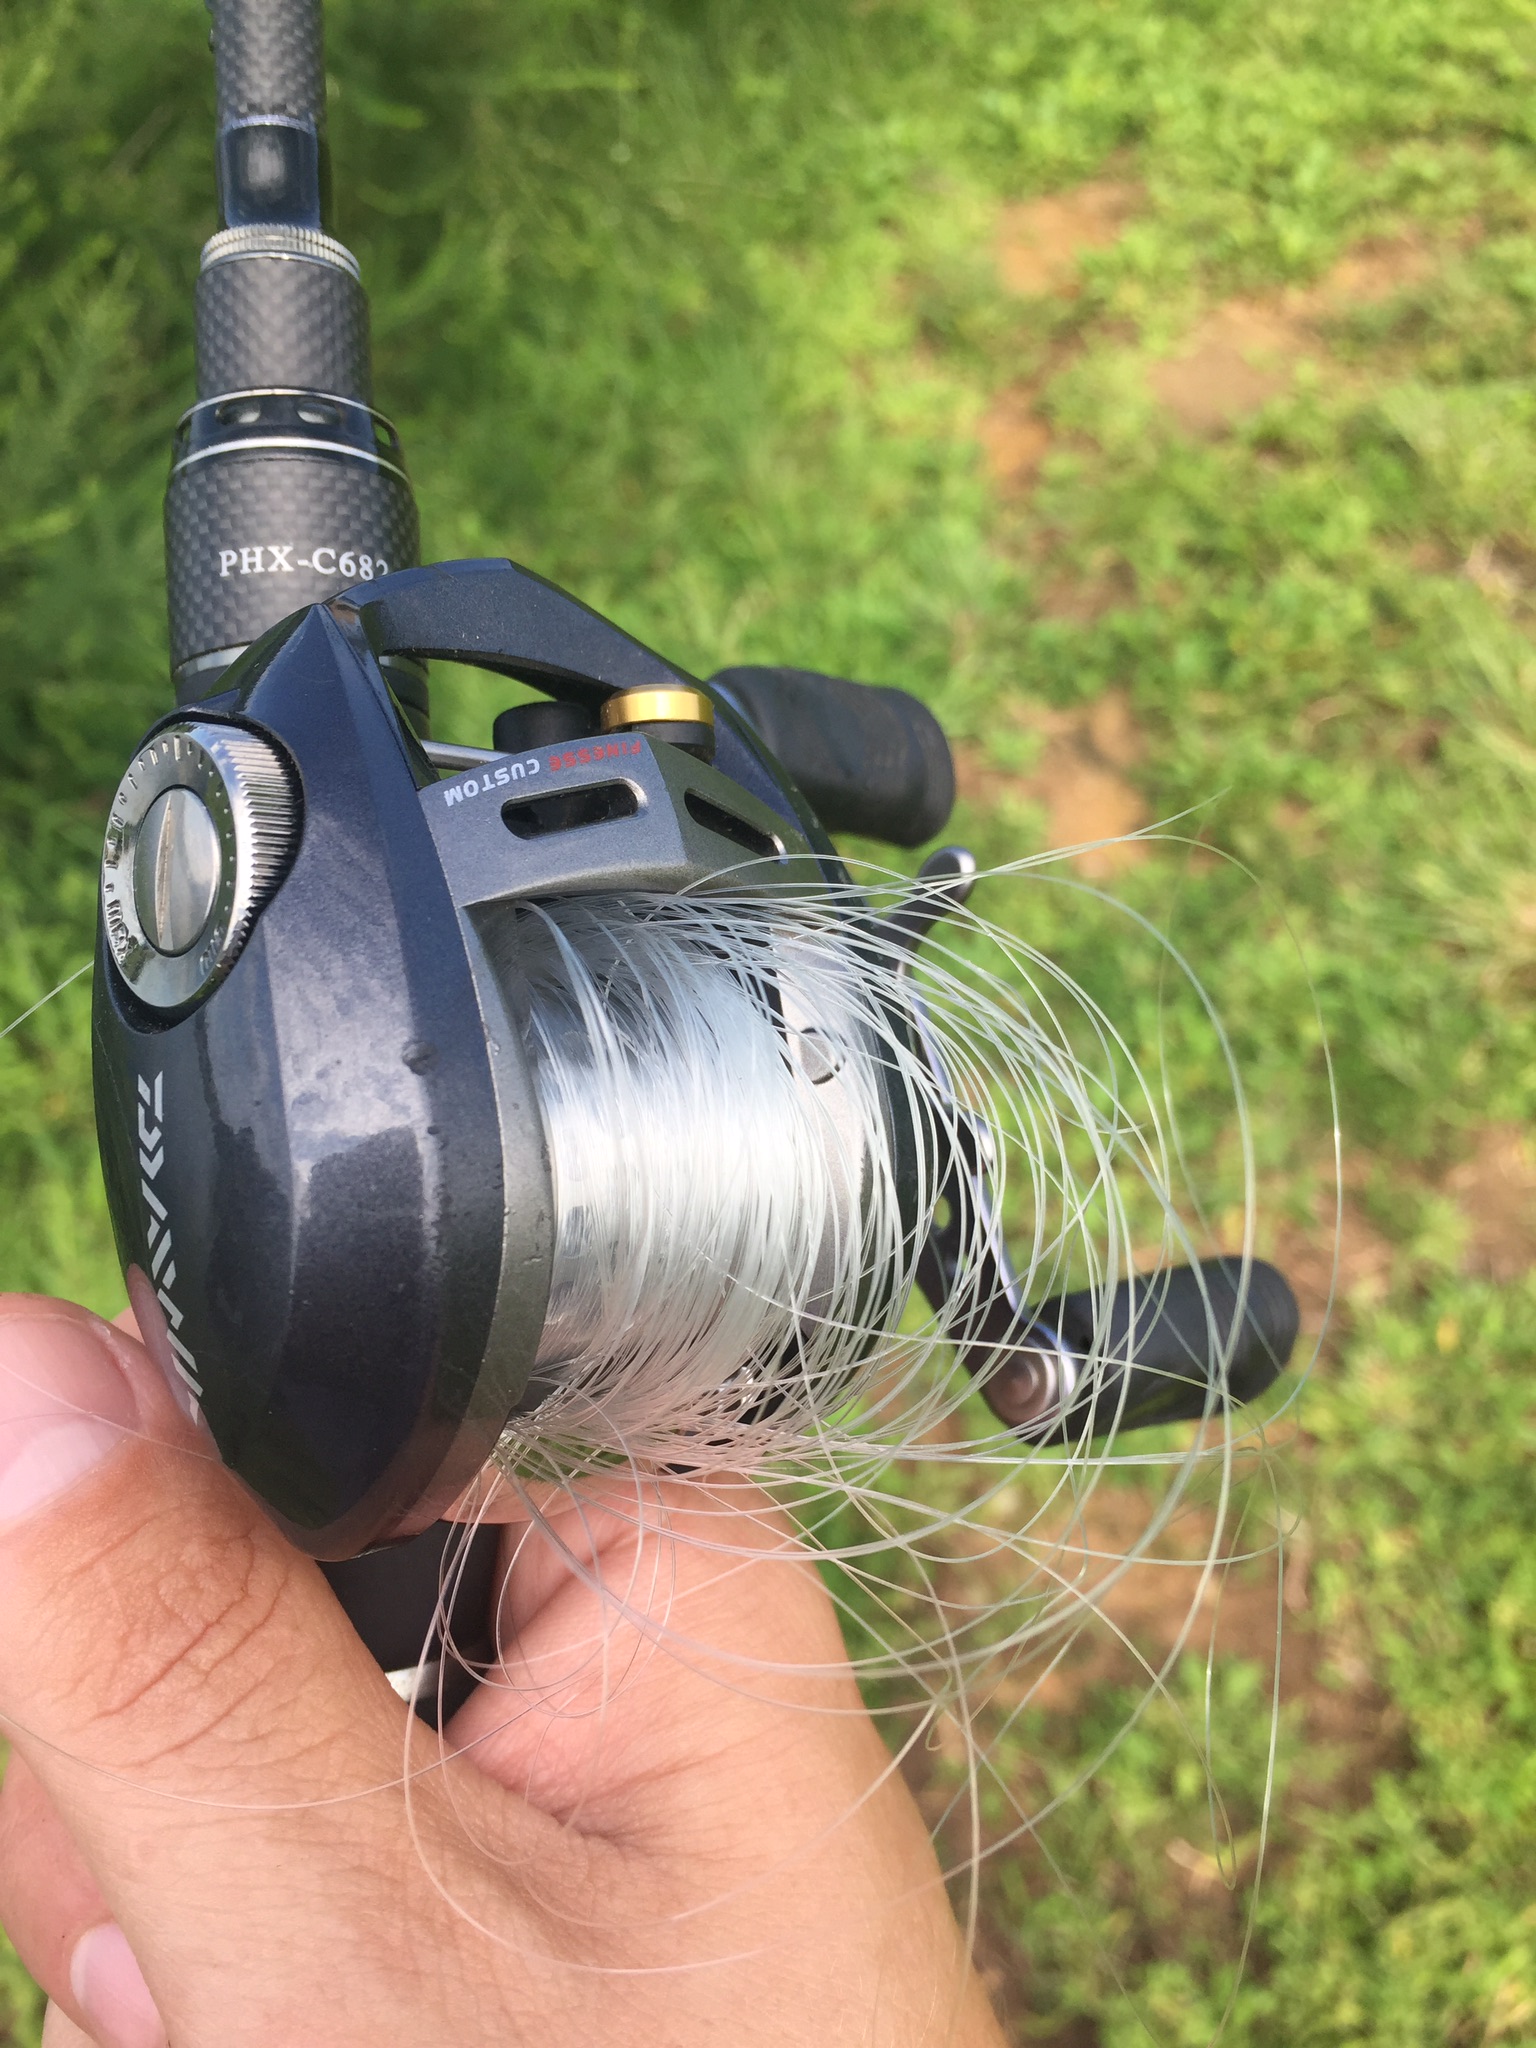 Recommendation for drop-shot Casting Reel - Fishing Rods, Reels, Line, and  Knots - Bass Fishing Forums